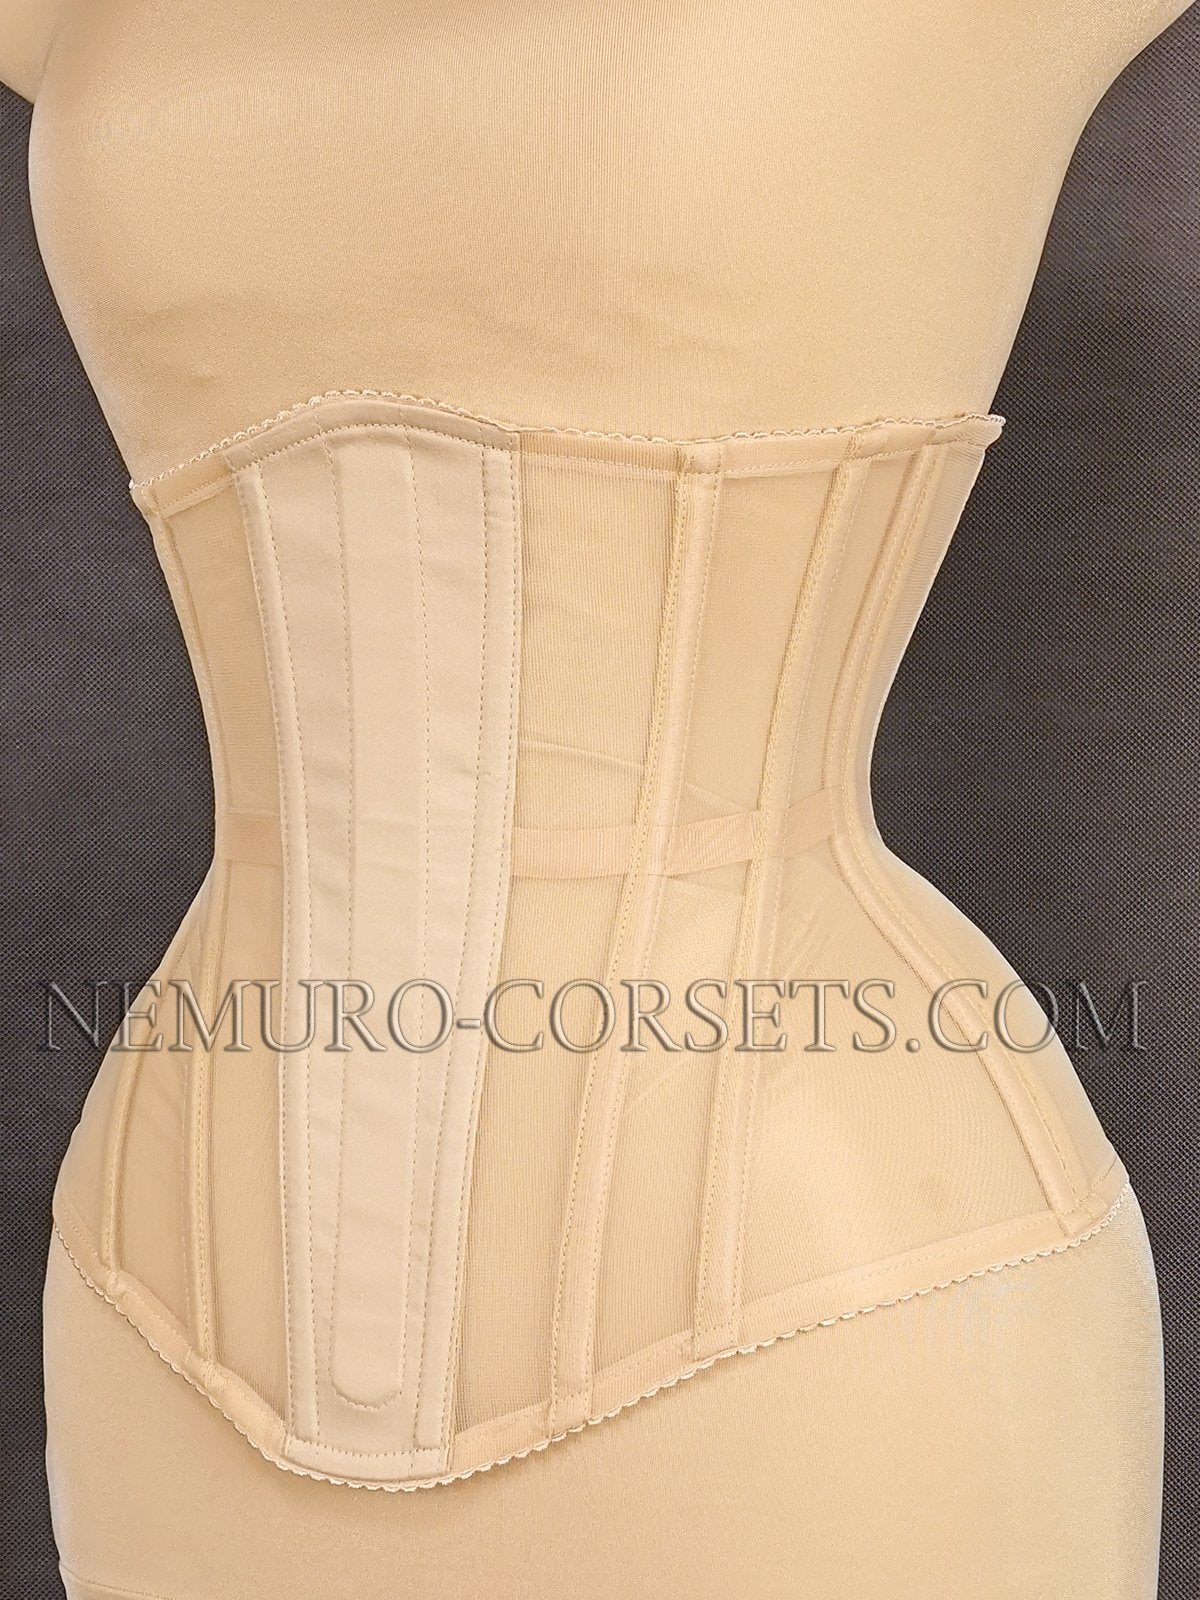 Classic Underbust corset with busk or zipper